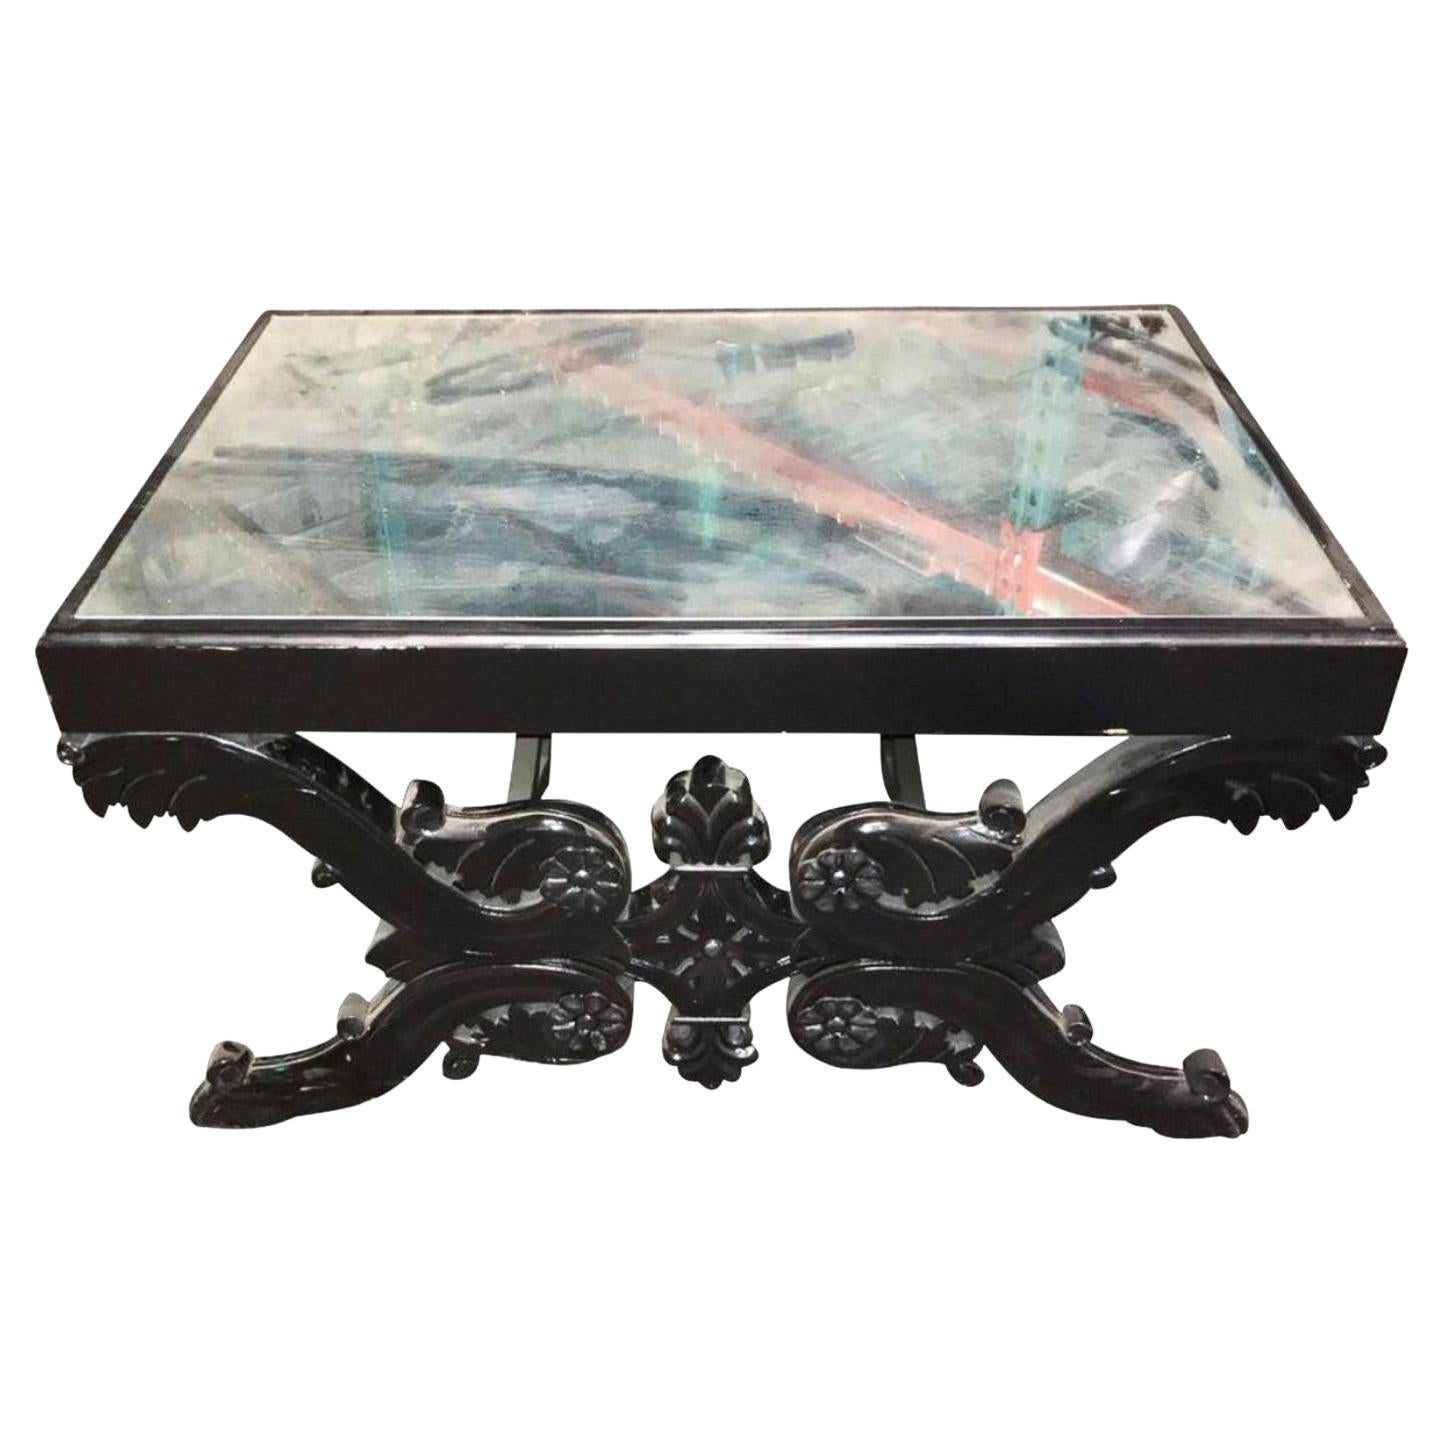 19th Century French Parisian Ebonized Lacquered Coffee Table